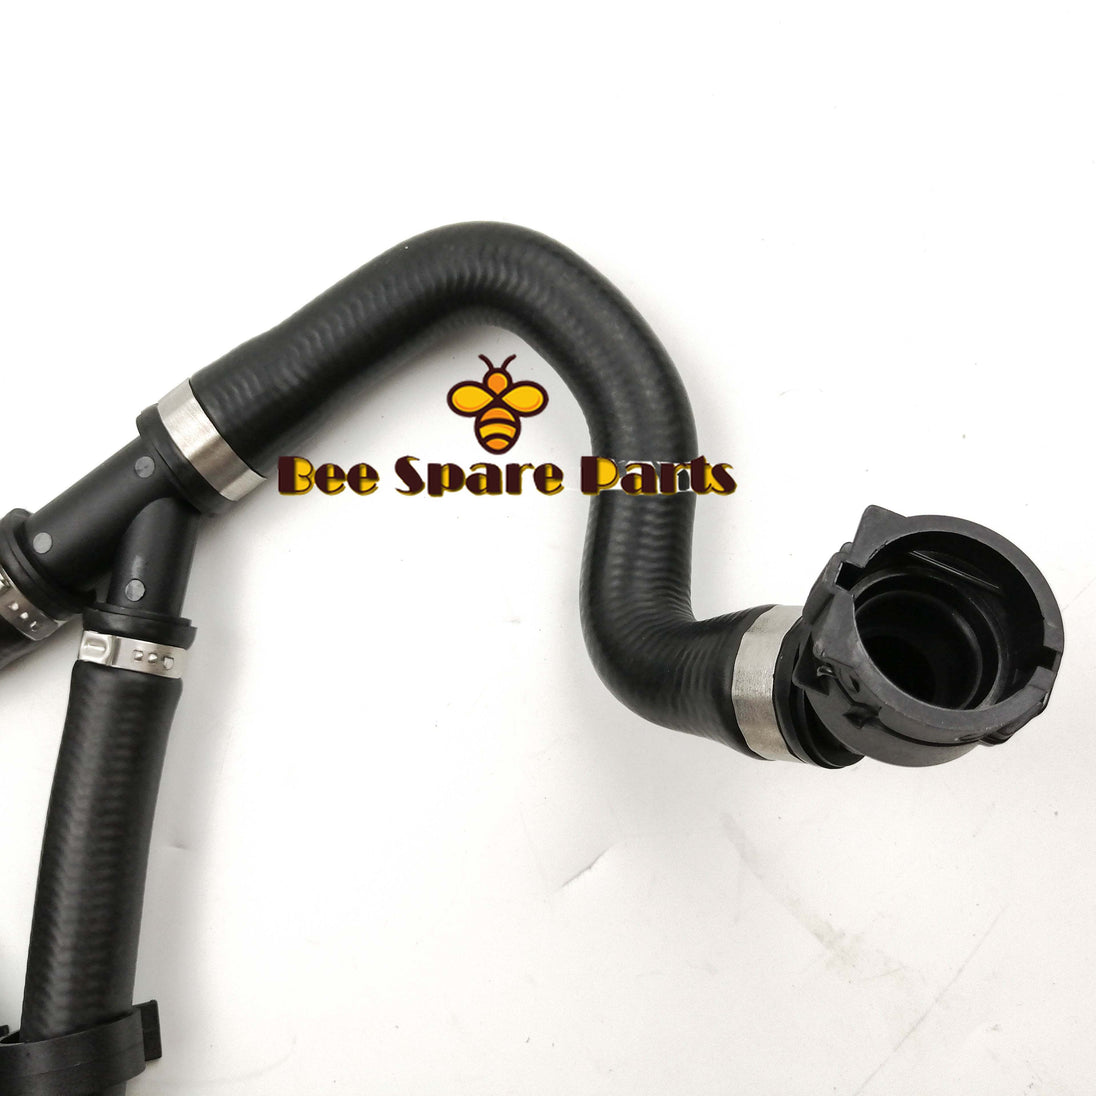 17127609532 Car Accessories Water Tank Cooling Pipe Engine Coolant Hose For BMW 3 Series F35 328LiX 428i 320Li  Part Number:  17127609532  Application:  For BMW 3 Series F35 328LiX 428i 320Li  Condition:  New Aftermarket Parts In Stock